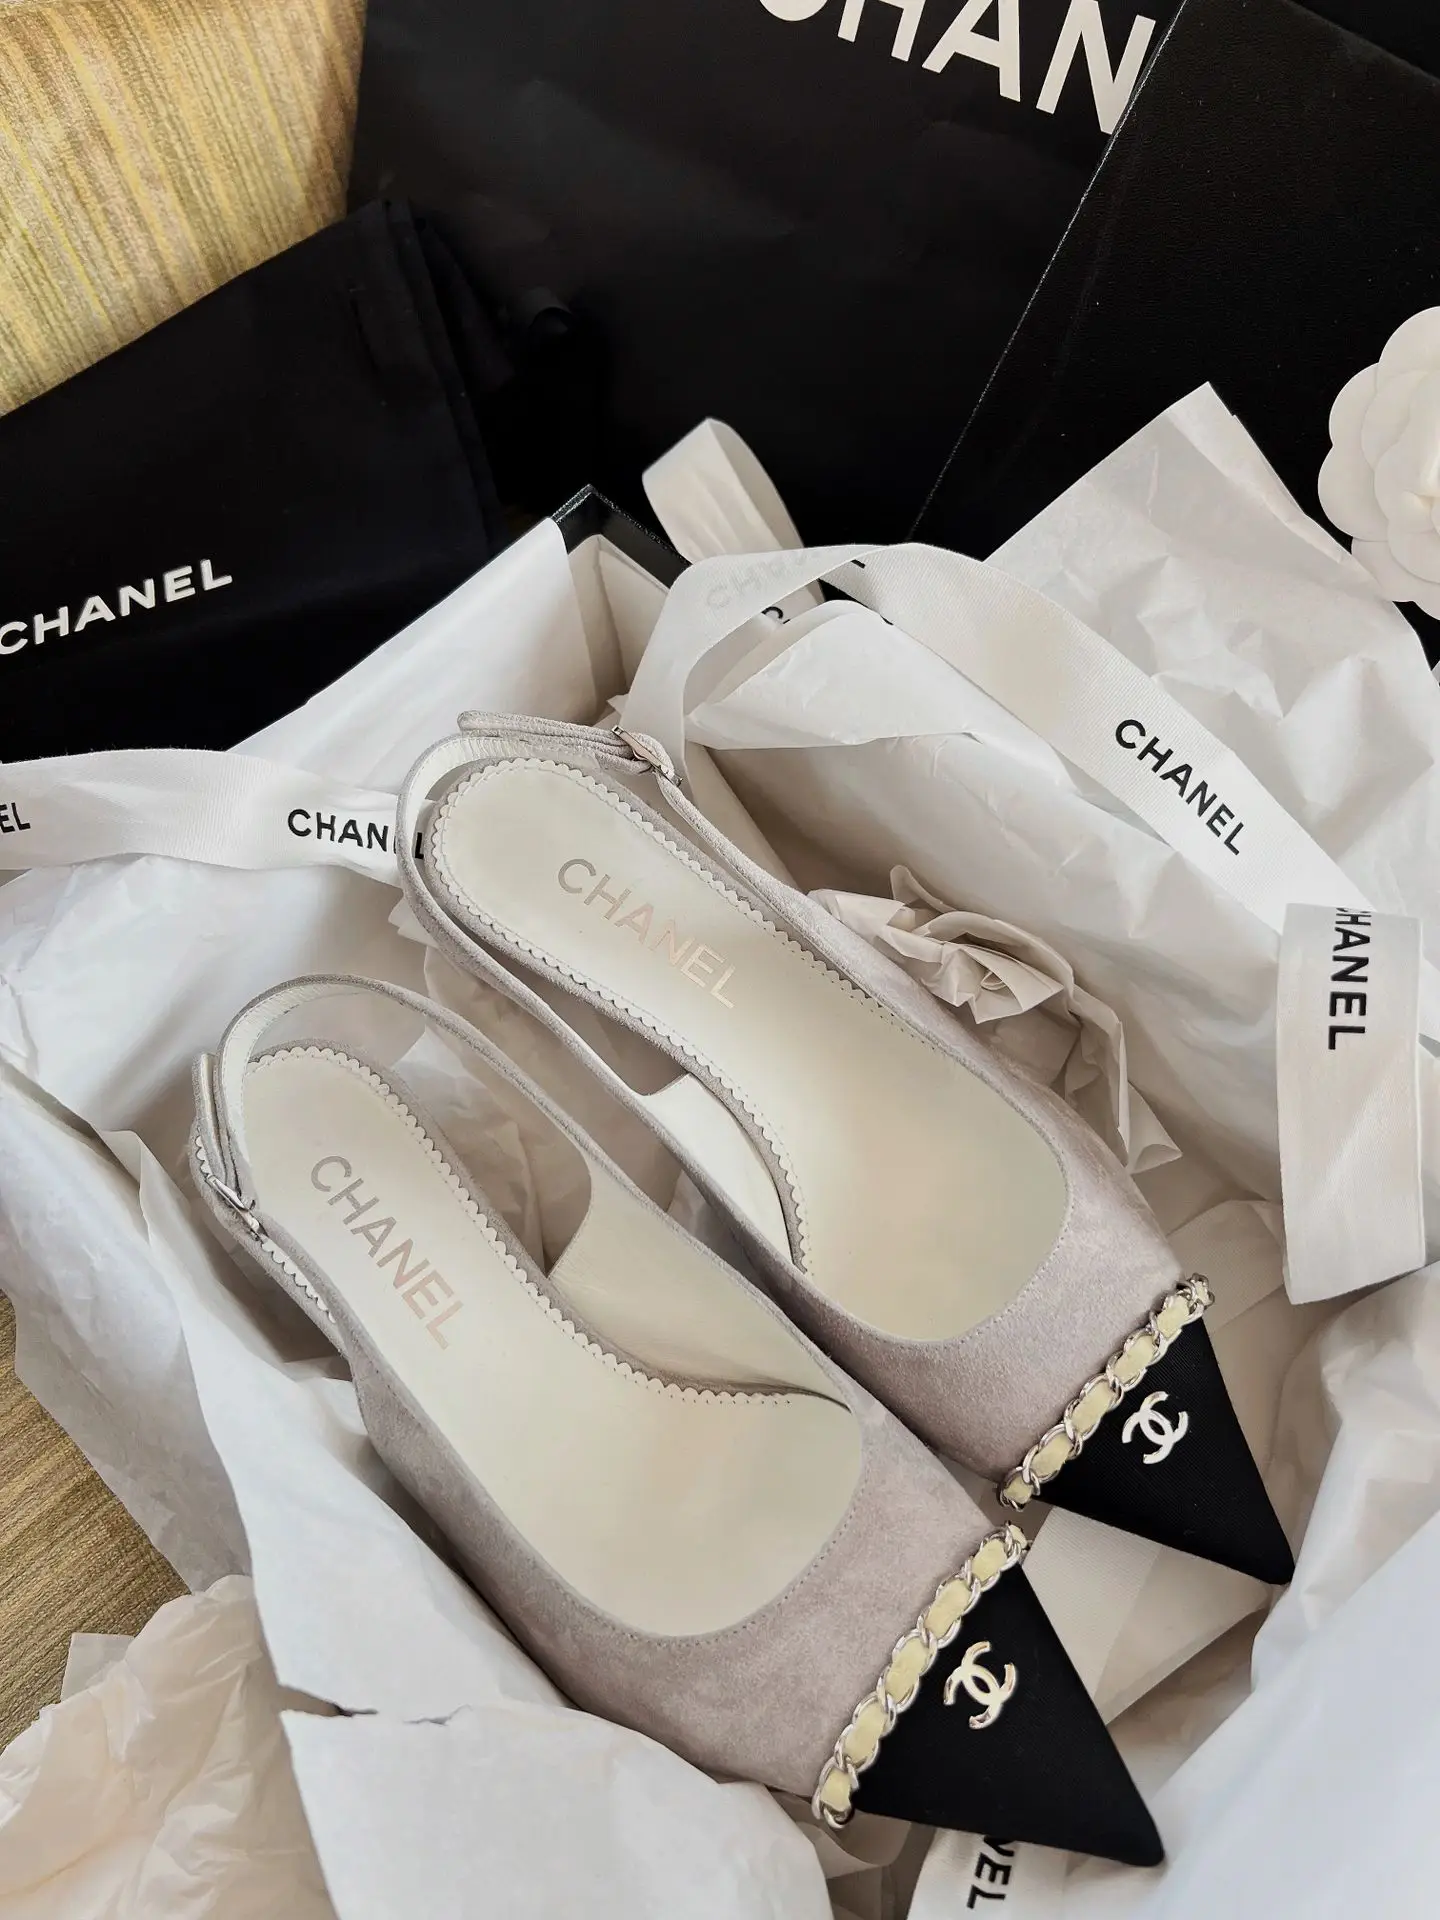 CHANEL Slingbacks Shoes 👢🤩, Gallery posted by Zoey 💎